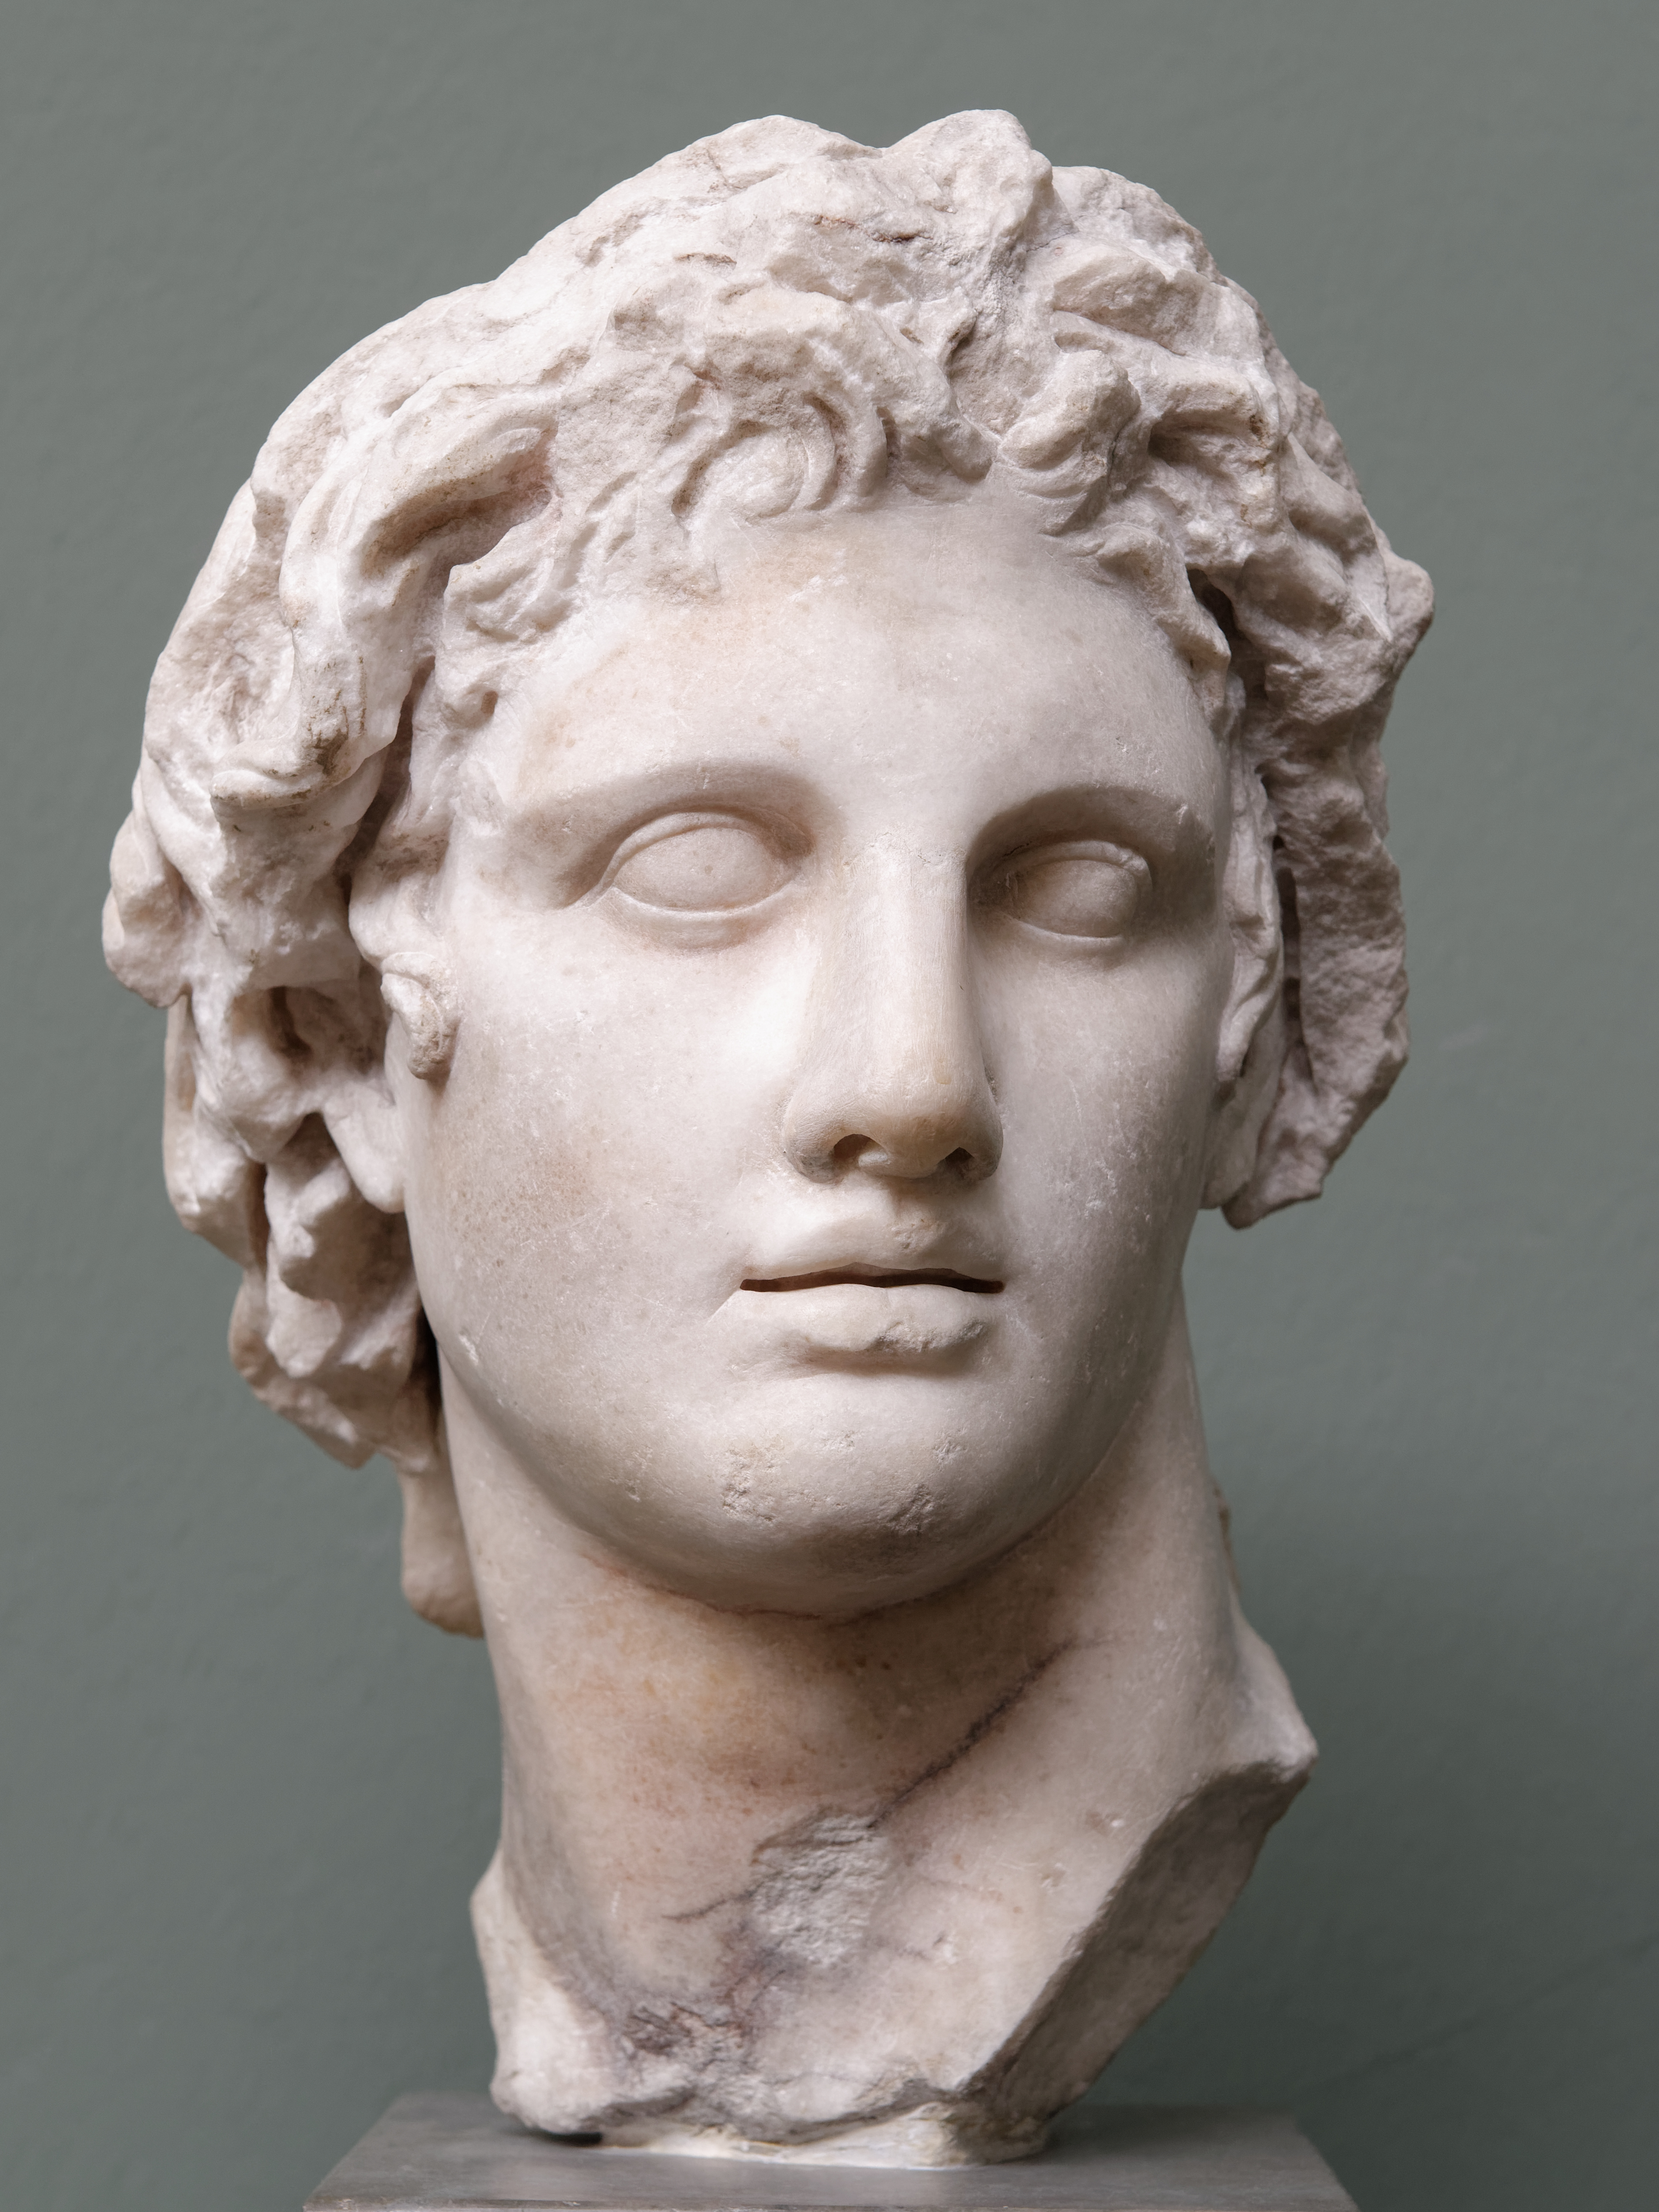 Marble bust of Alexander the Great